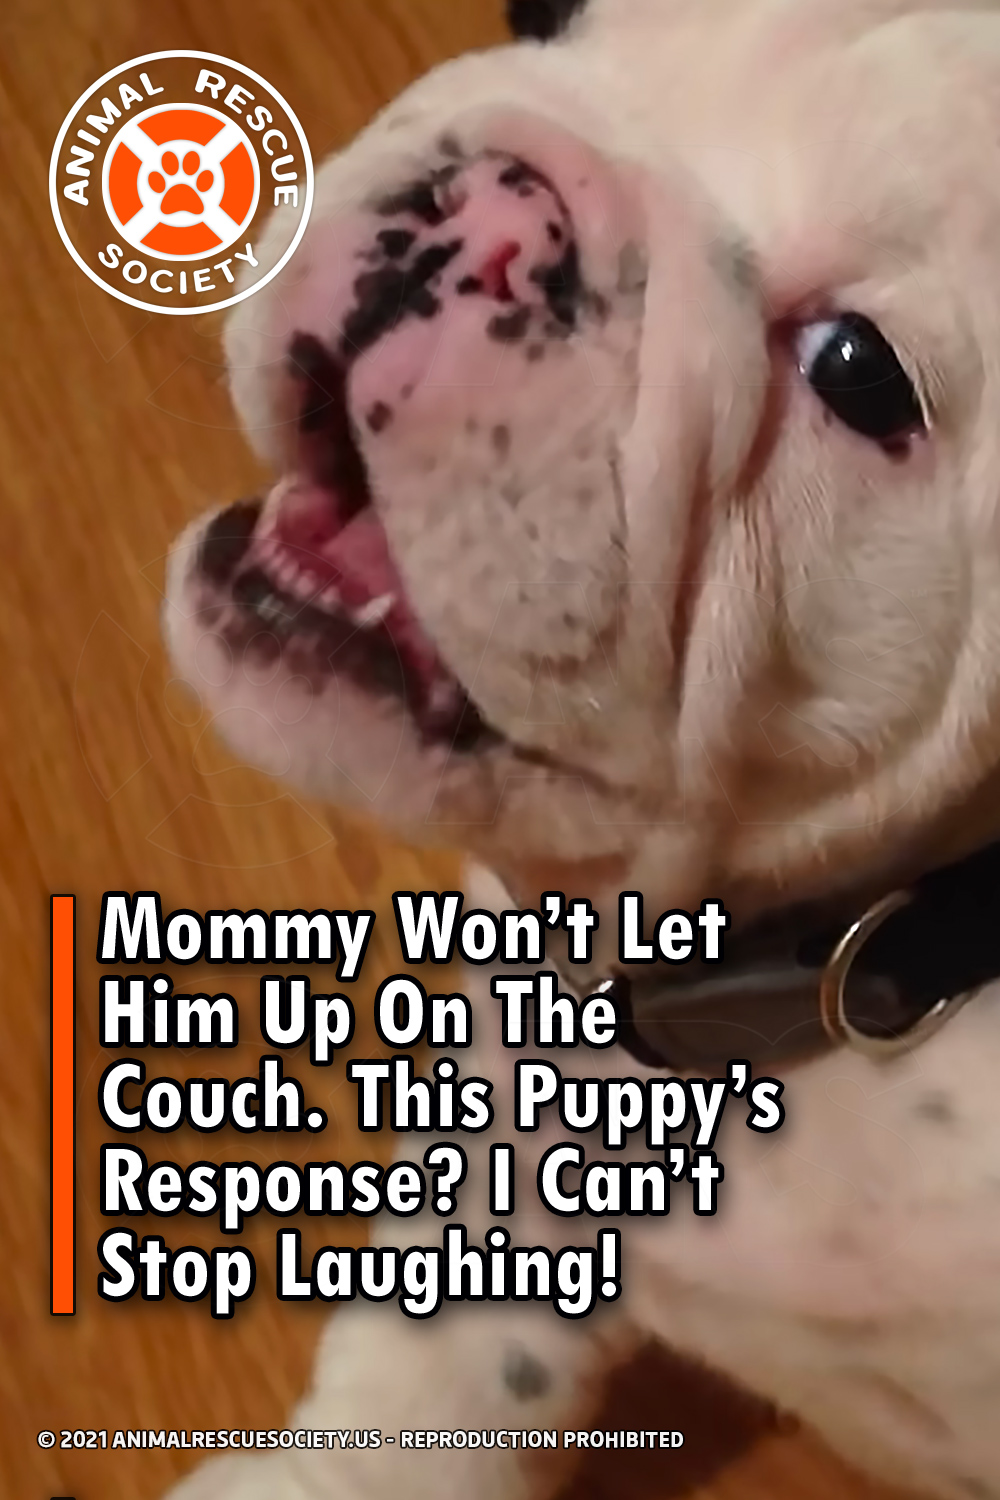 Mommy Won’t Let Him Up On The Couch. This Puppy’s Response? I Can’t Stop Laughing!